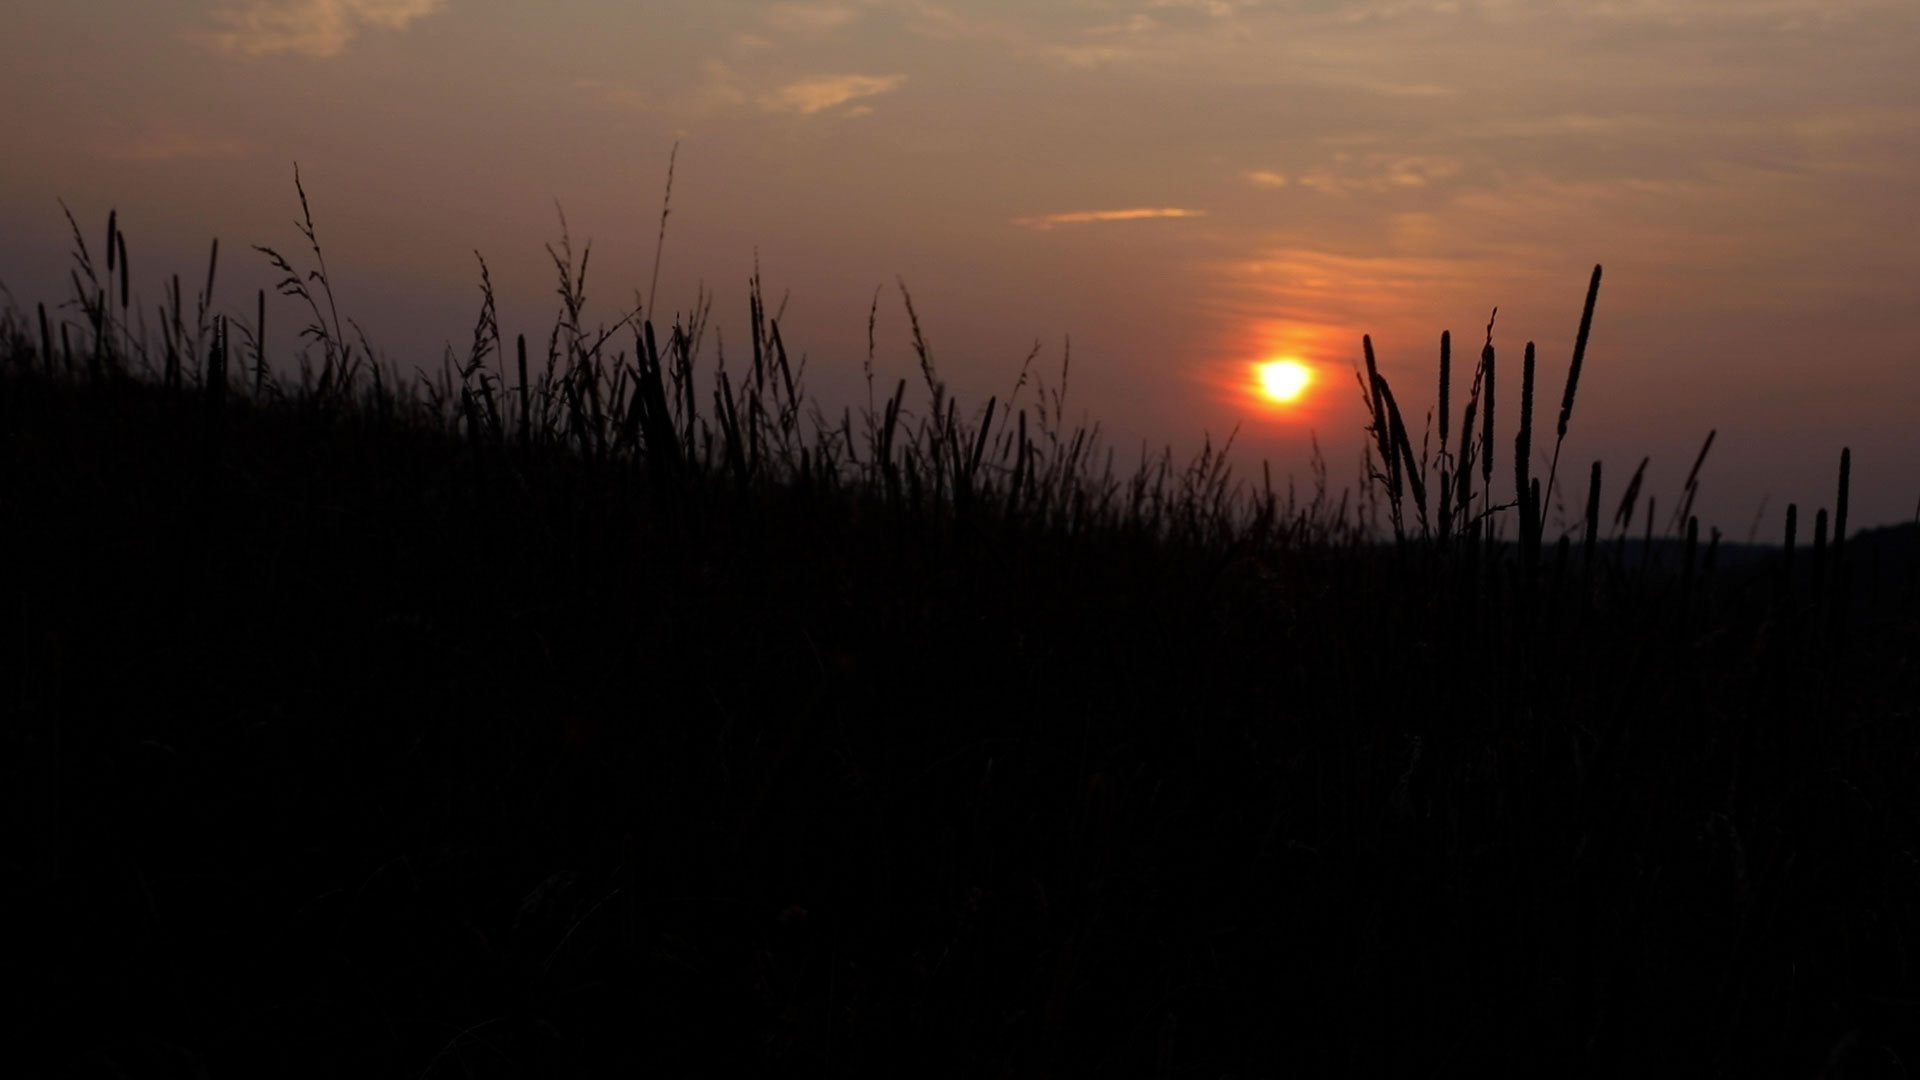 Sun sets over a silhouetted field of reeds